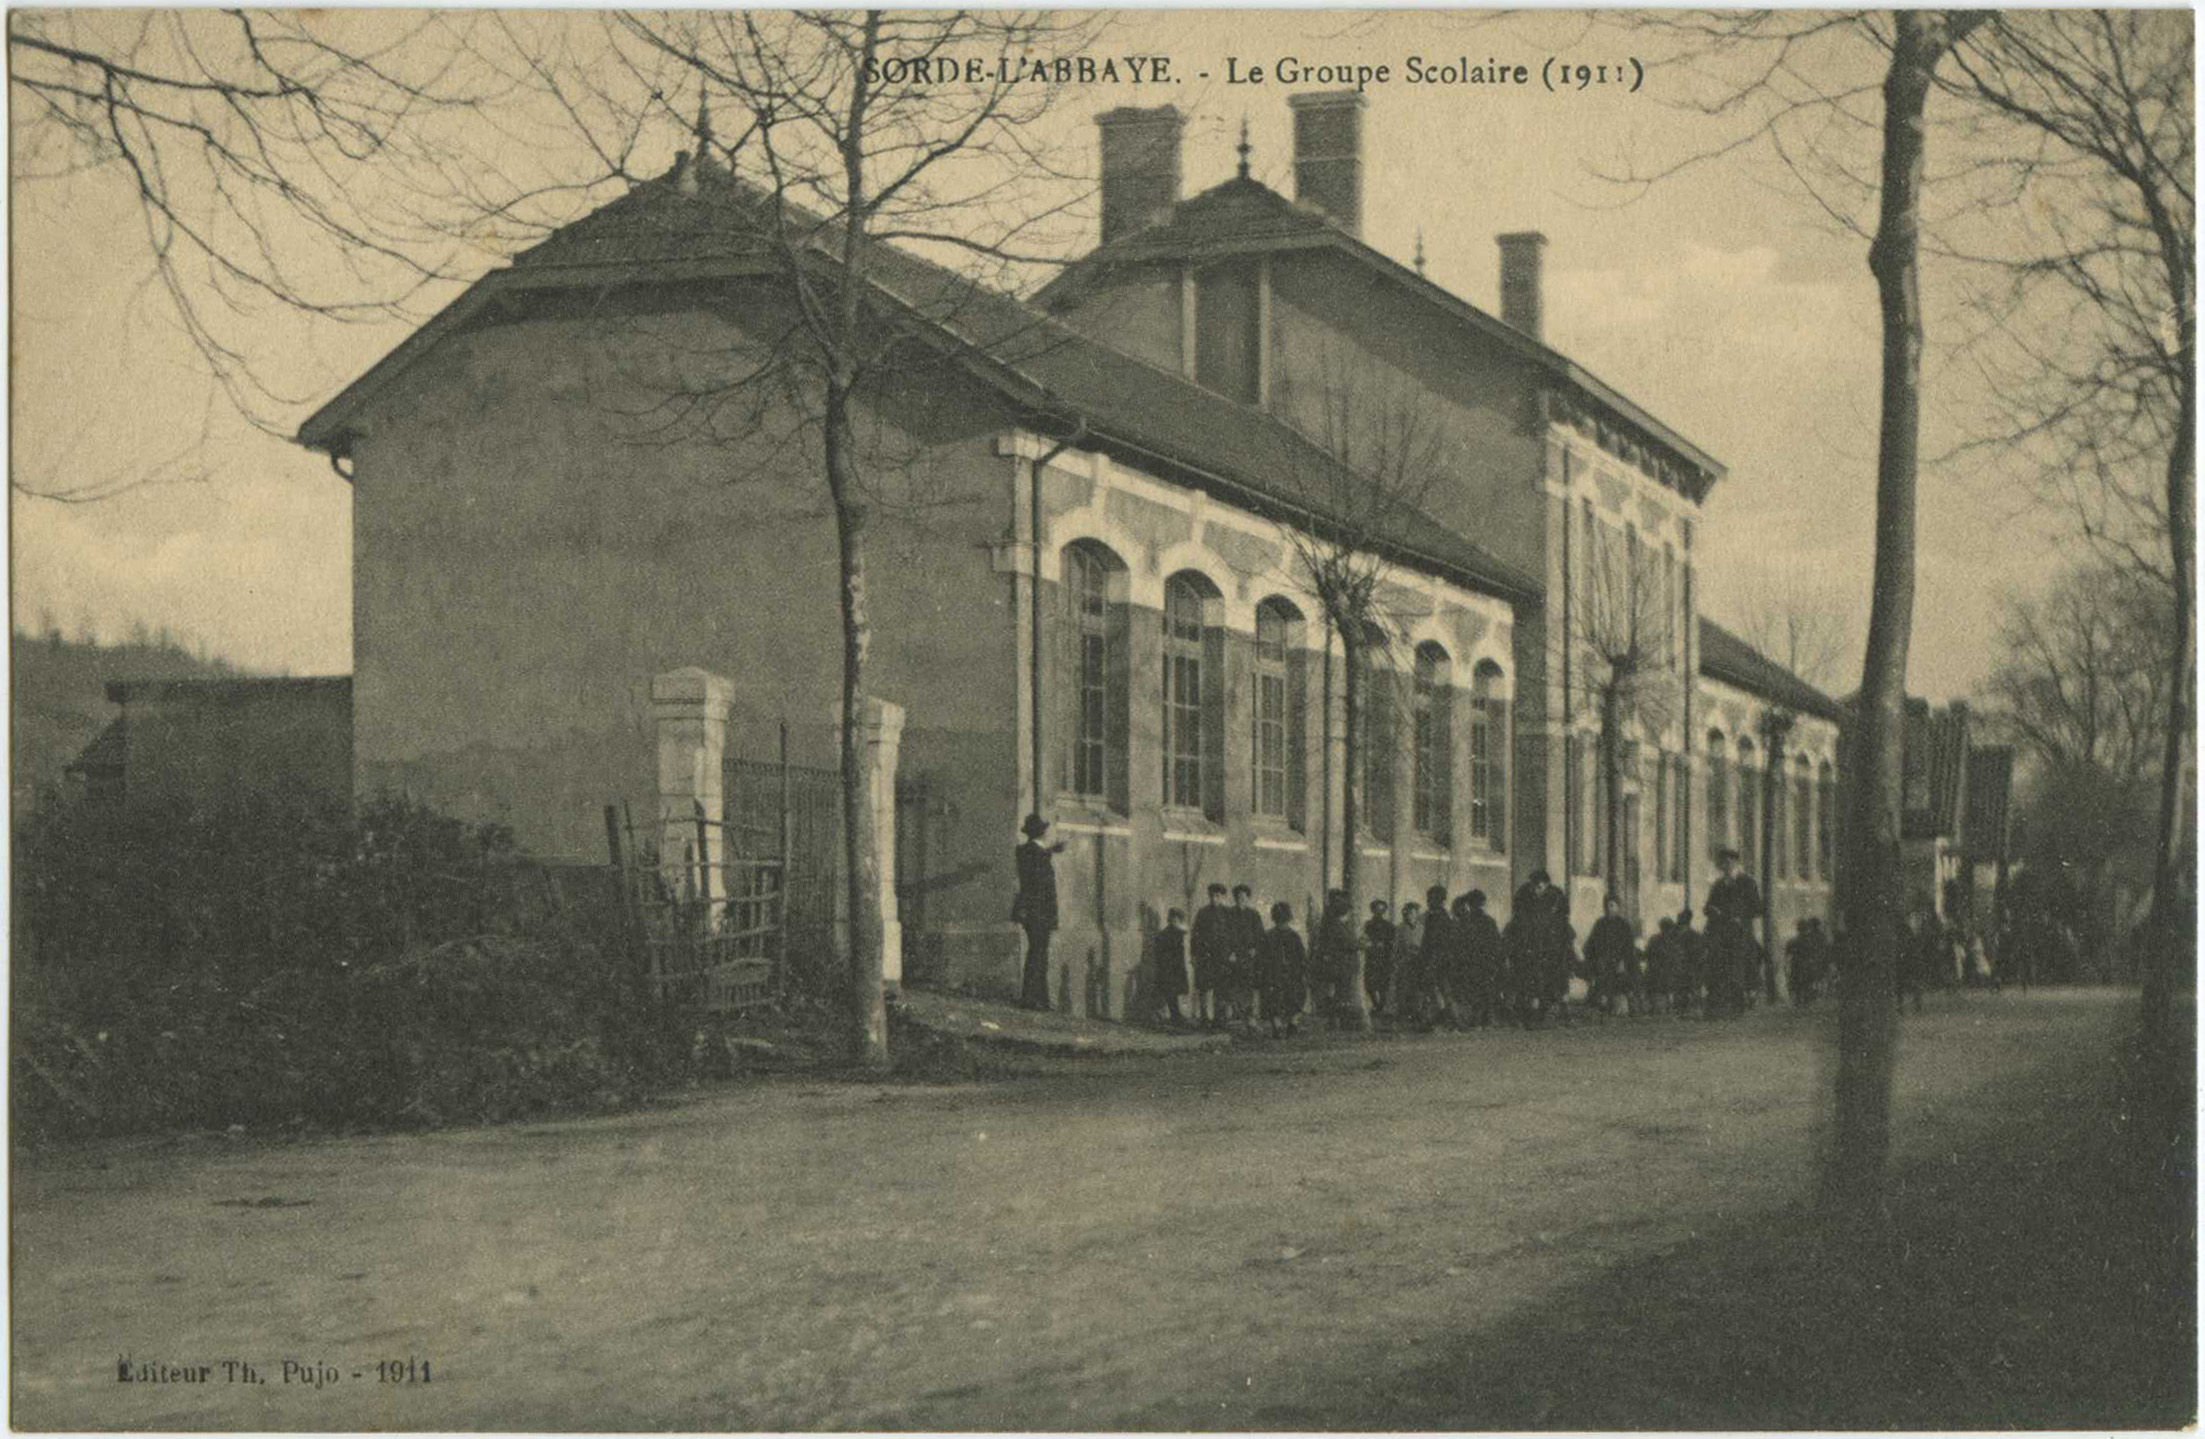 Sorde-l'Abbaye - Le Groupe Scolaire (1911)